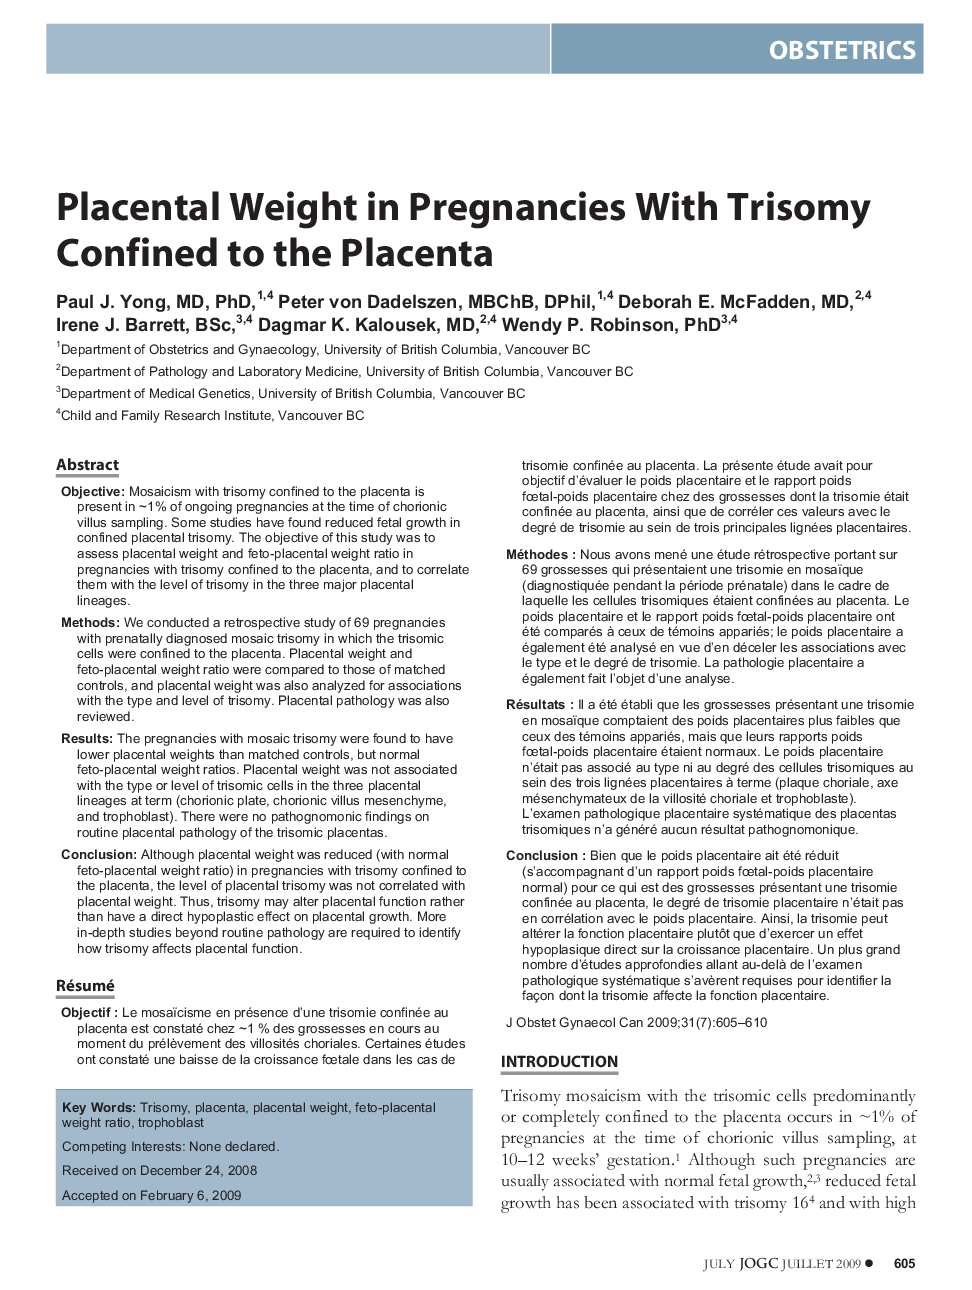 Placental Weight in Pregnancies With Trisomy Confined to the Placenta